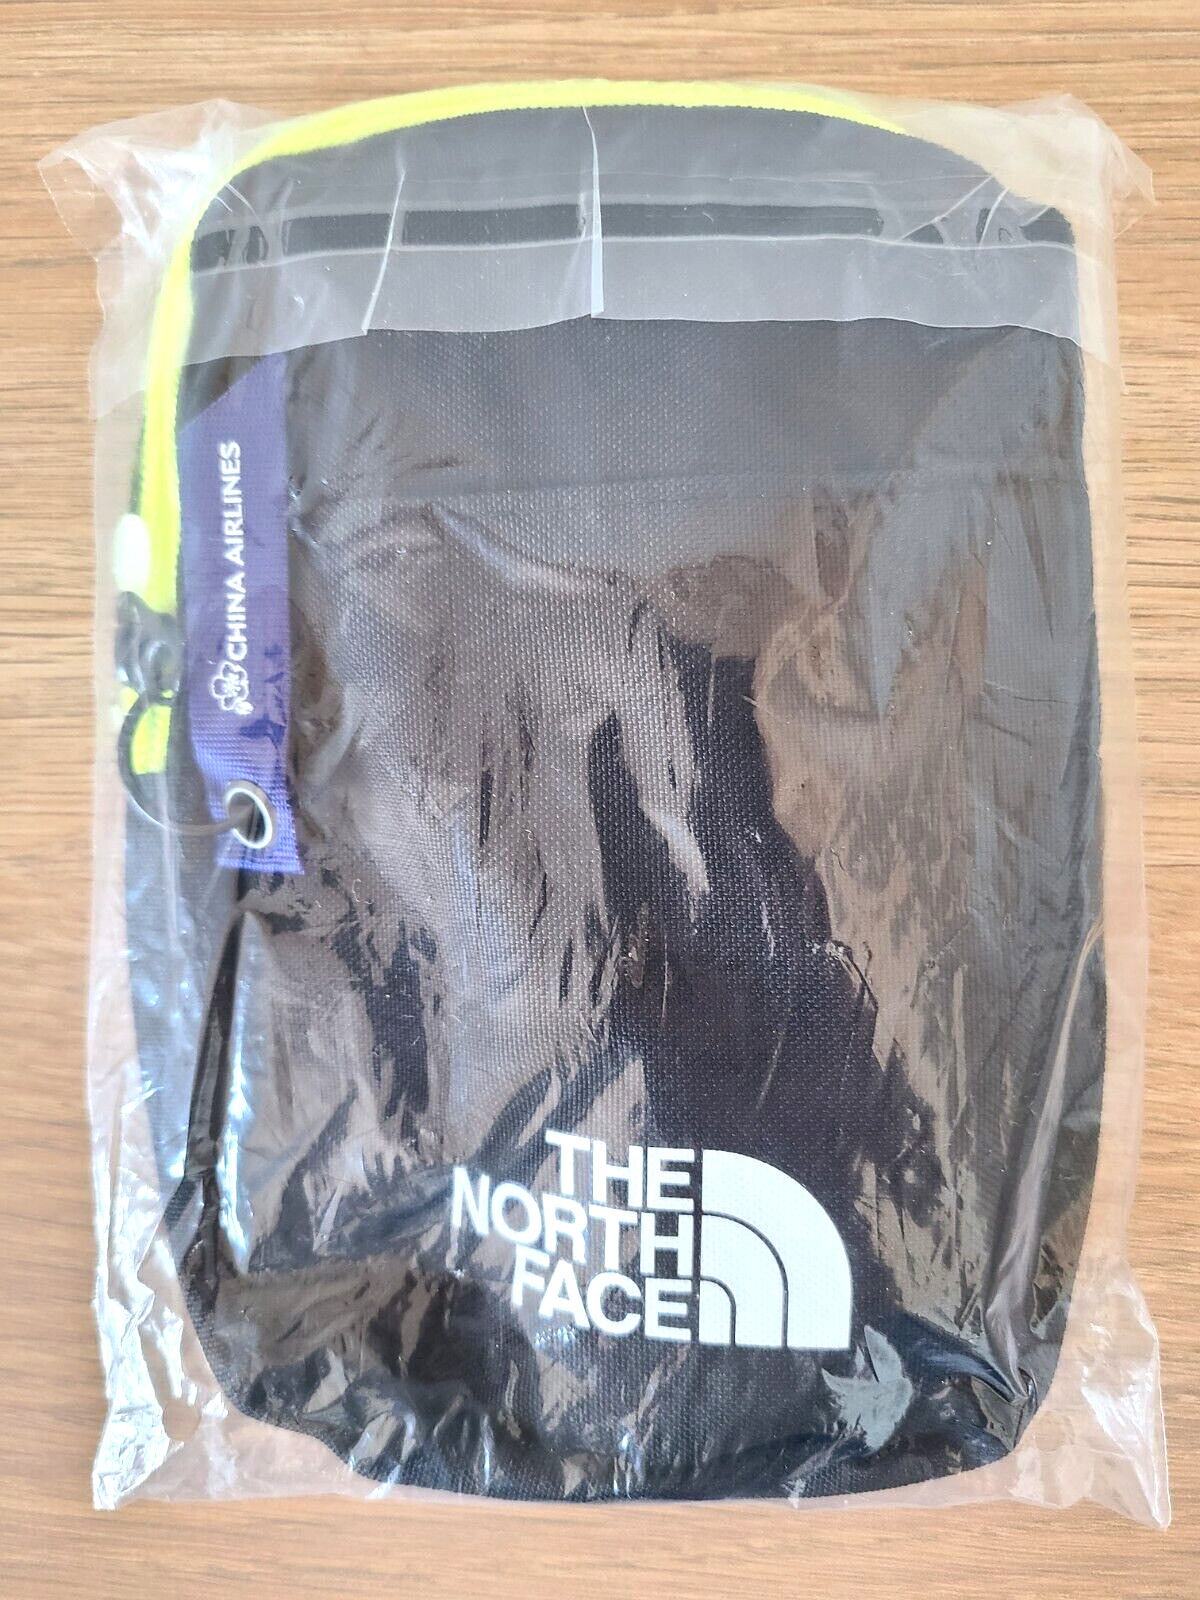 The North Face for China Airlines Premium Economy Class Amenity Kit